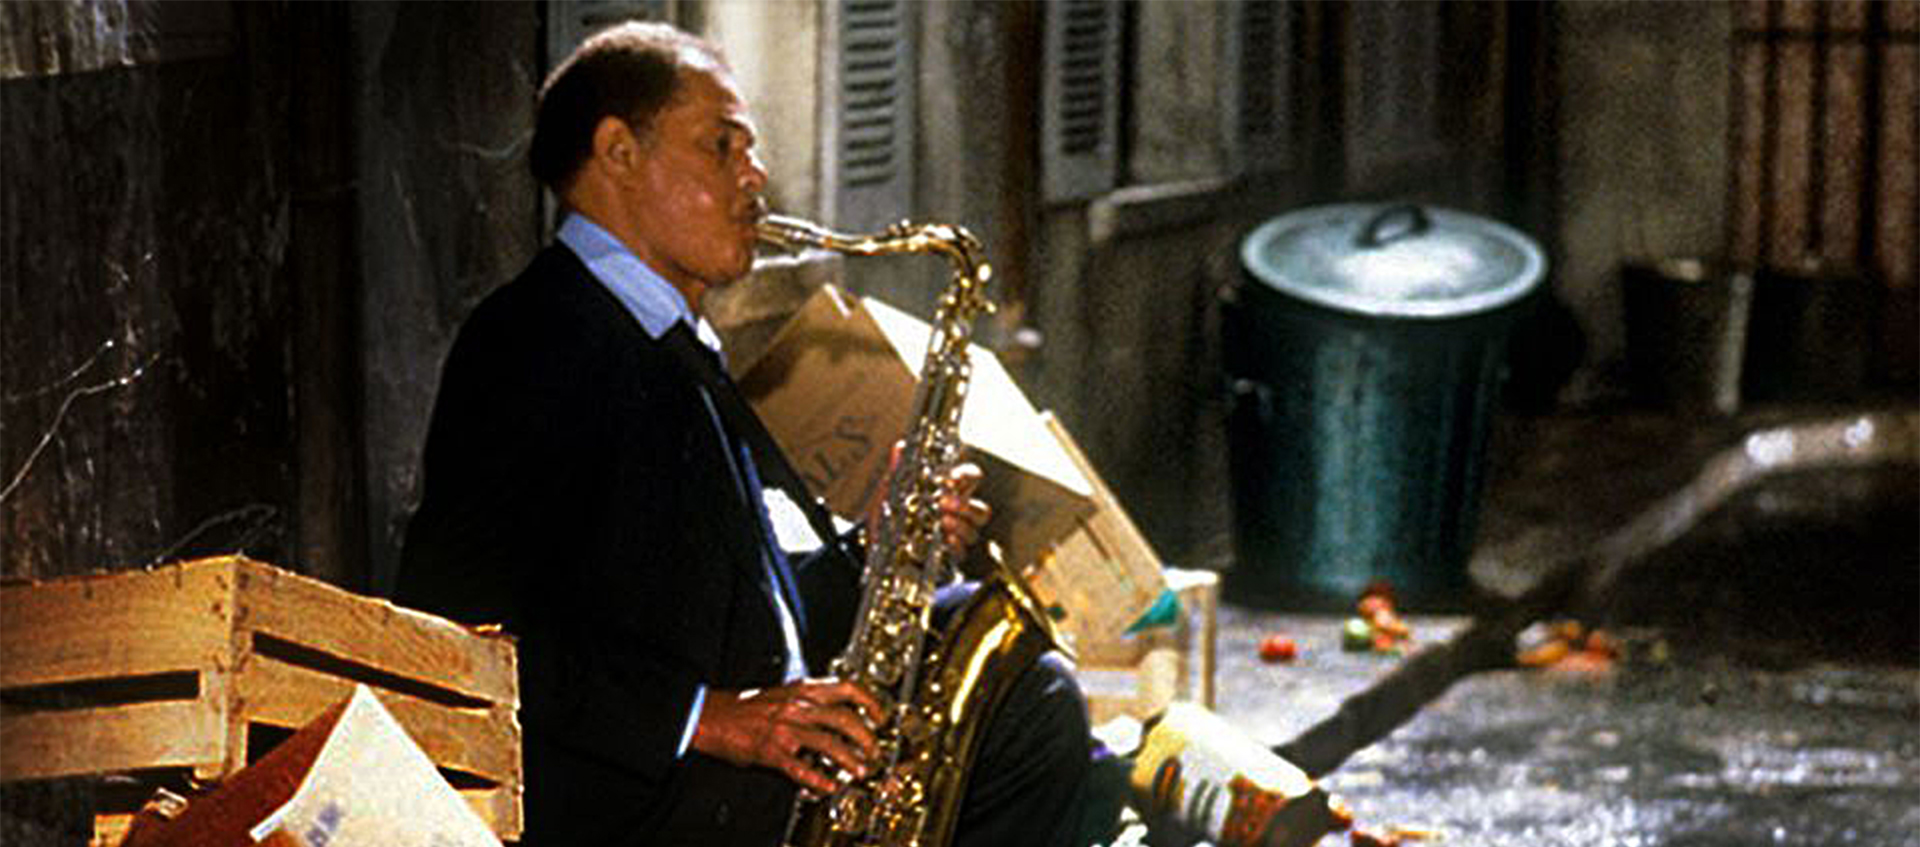 A man, seated in an alley plays a saxophone. He is surrounded by boxes and garbage.